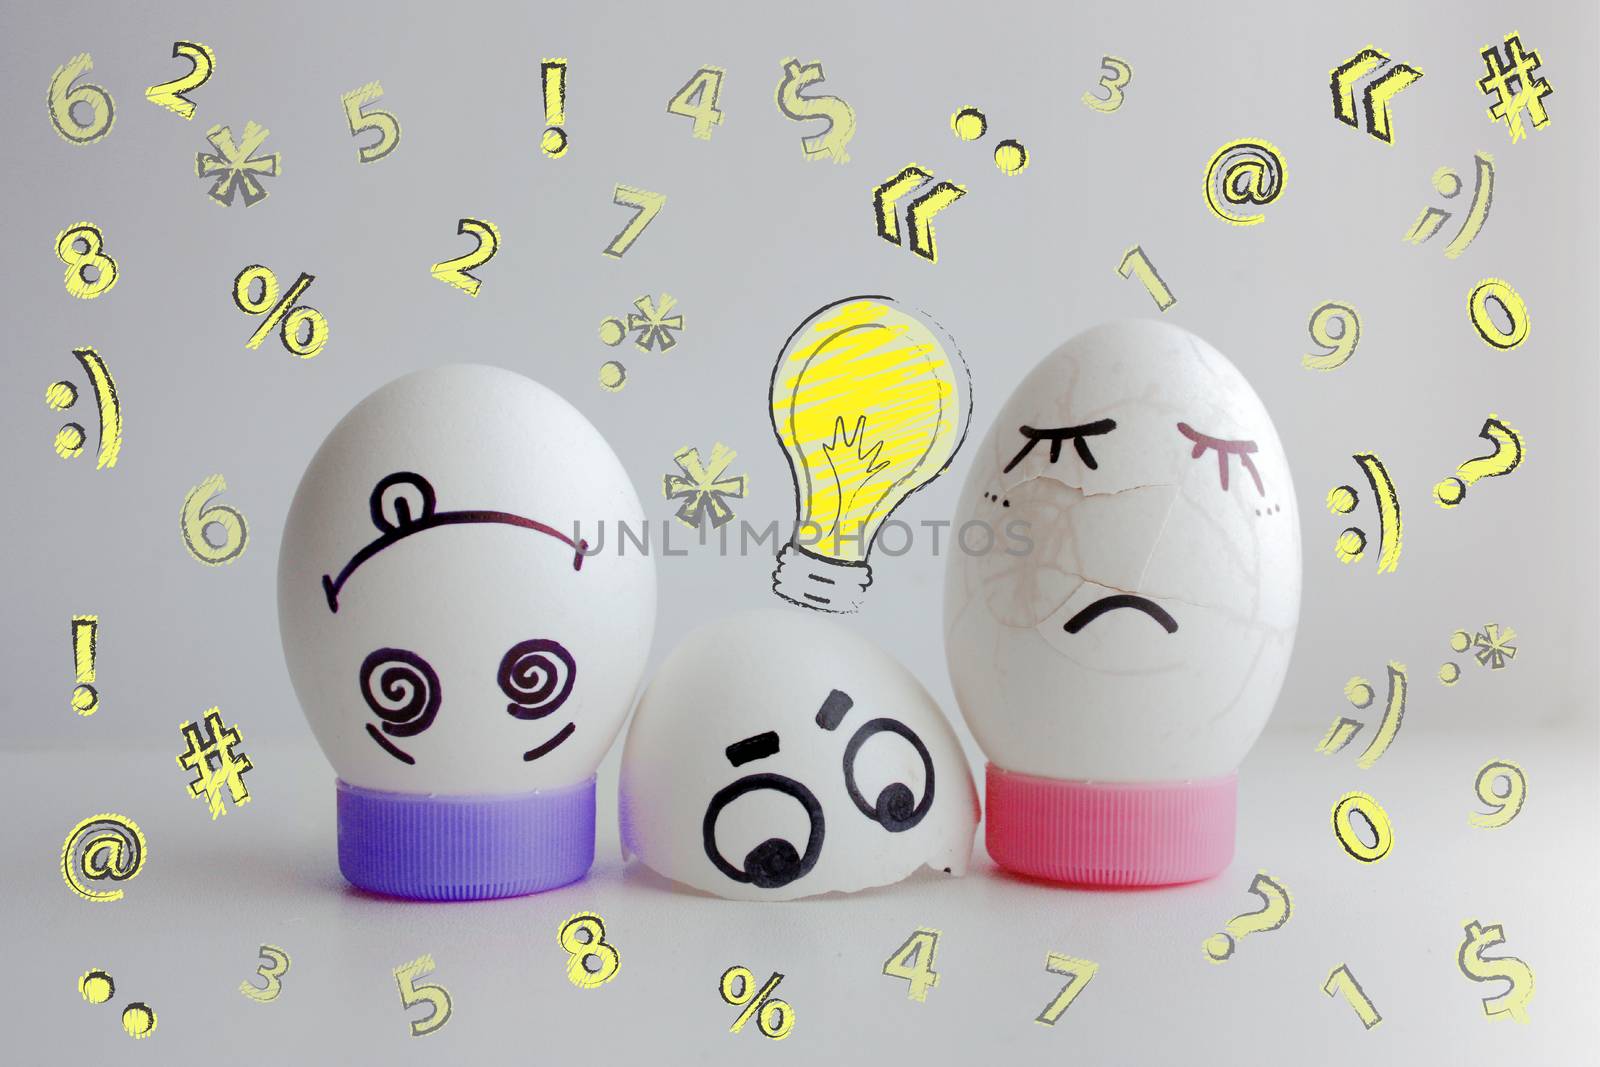 Concept of idea. Light. Eggs cheerful with a face two on a white background on a stand the concept of a jumped out crashed. Photo for your design